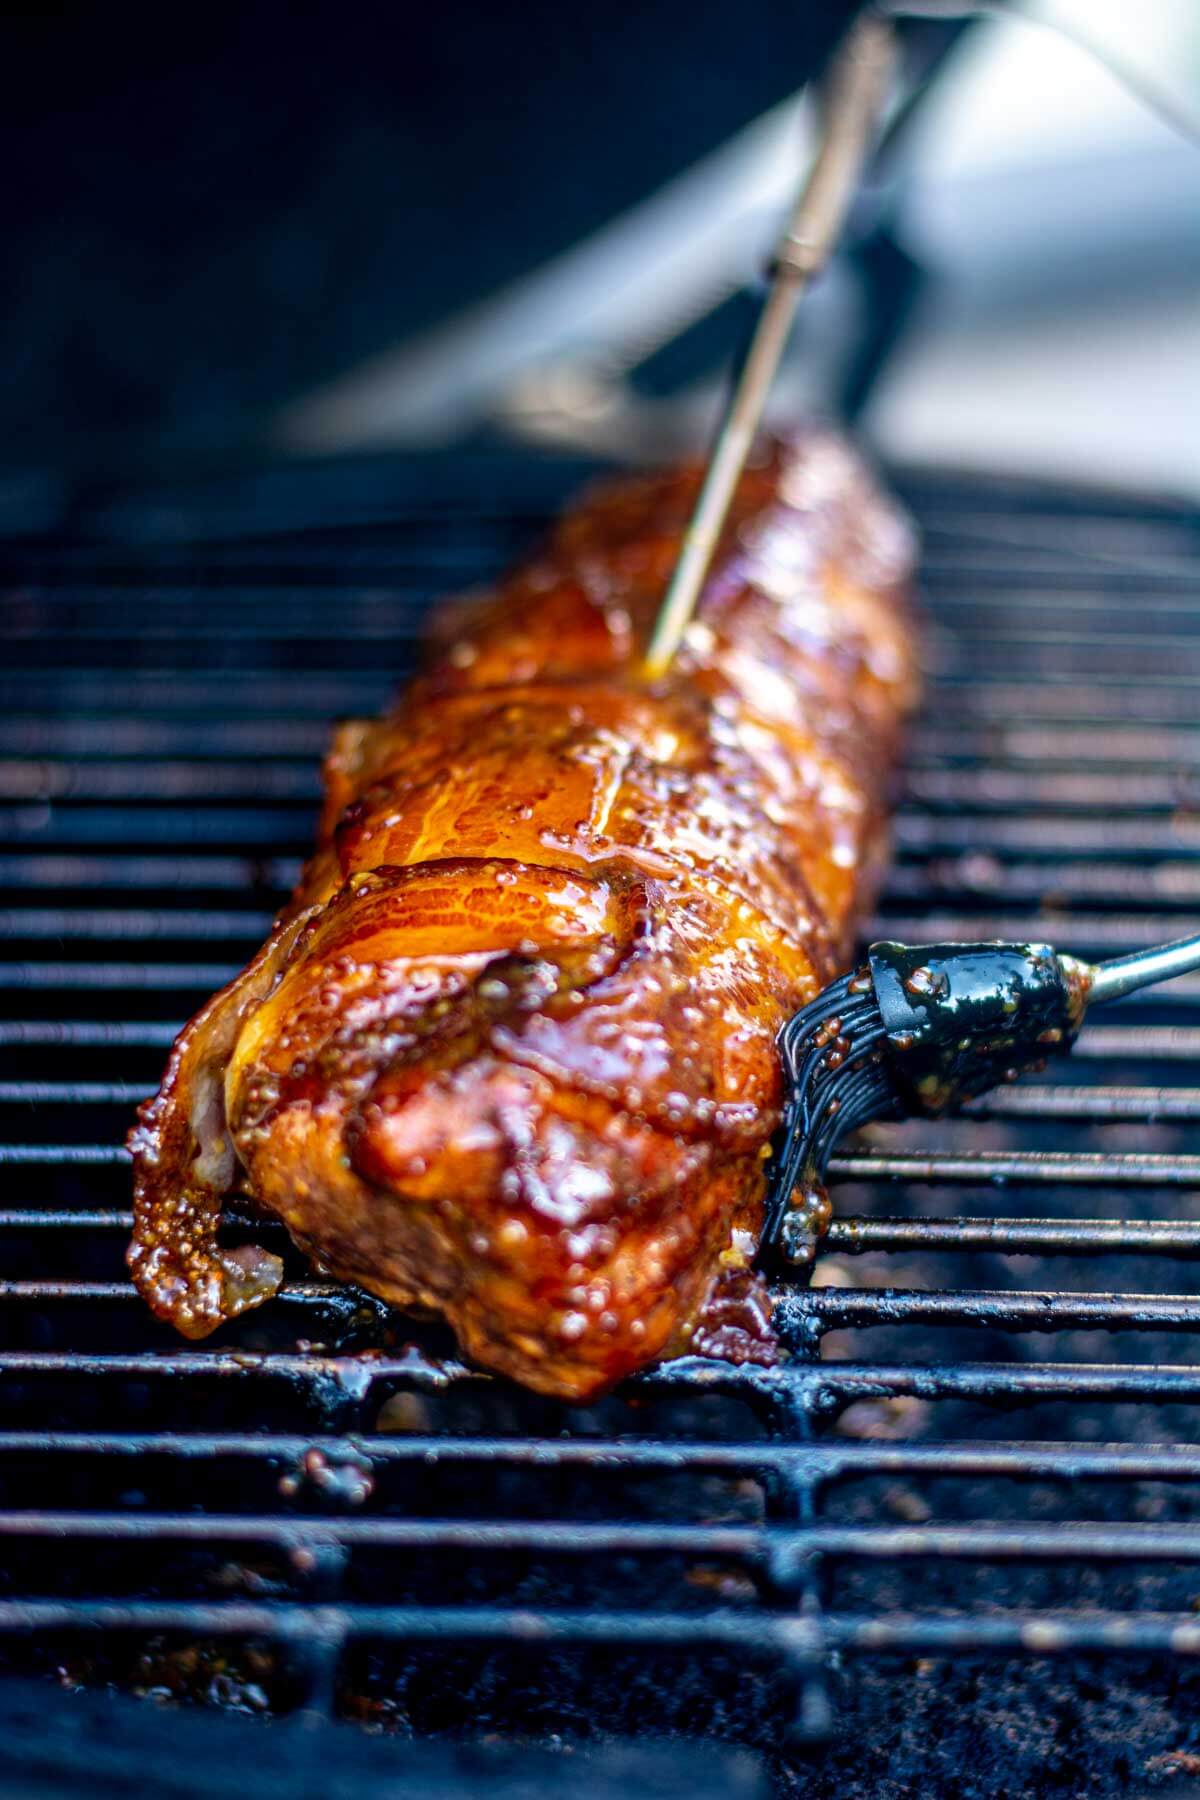 pork tenderloin is wrapped in bacon and being brushed with a honey mustard glaze.